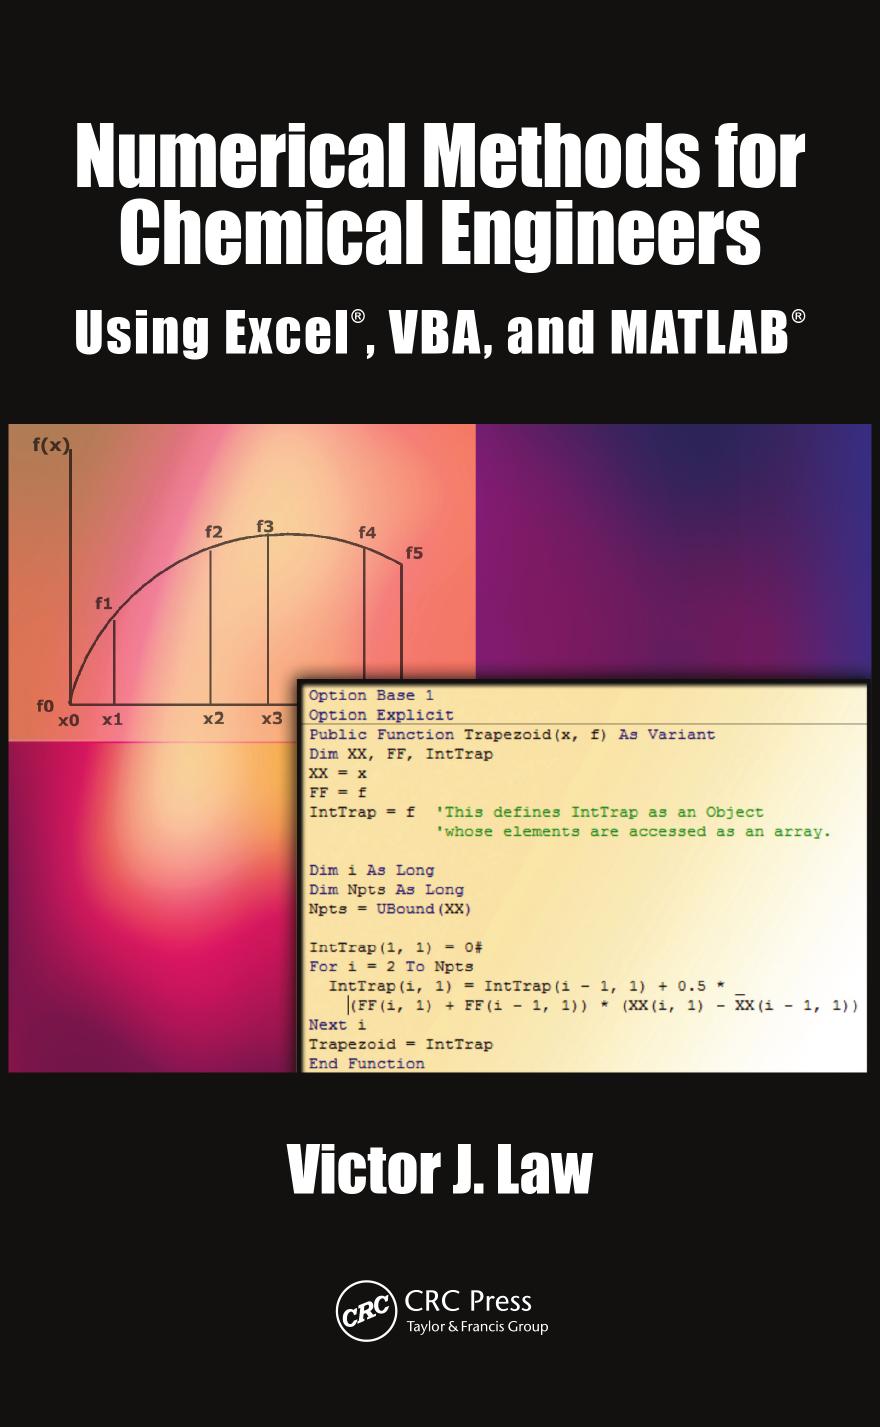 Numerical Methods for Chemical Engineers: Using Excel, VBA, and MATLAR